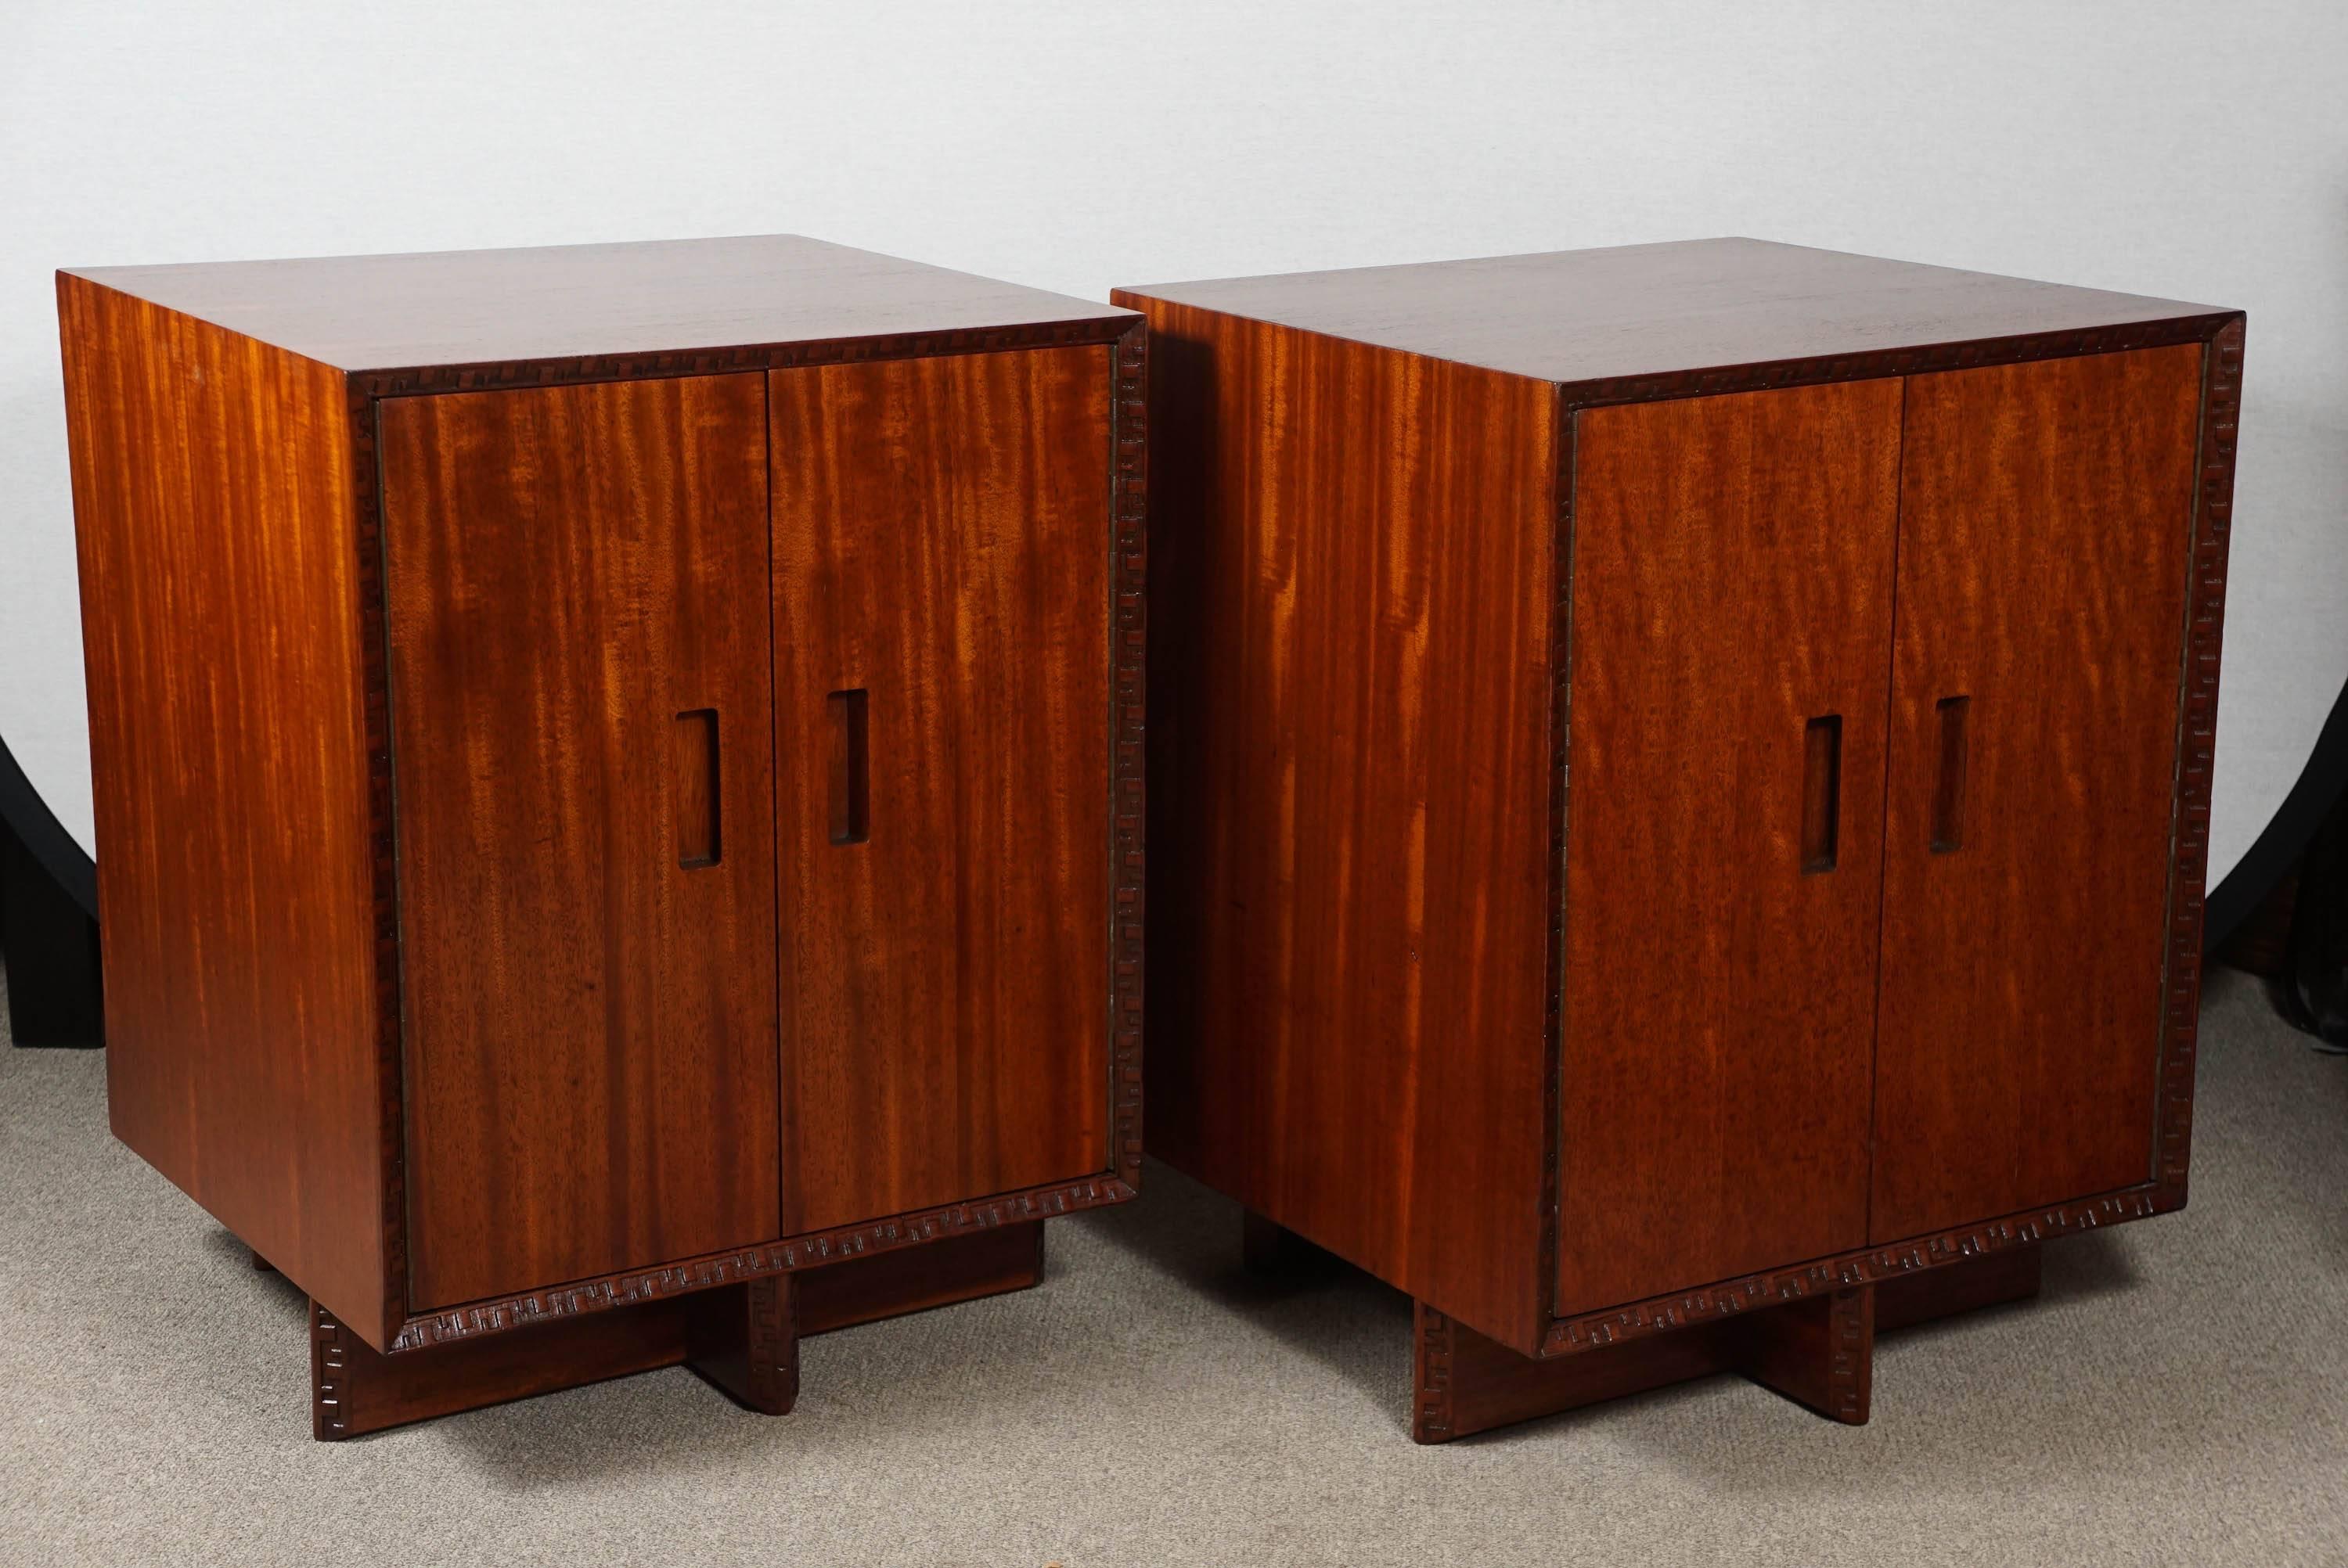 Pair of cabinets designed by Frank Lloyd Wright for Henredon. 